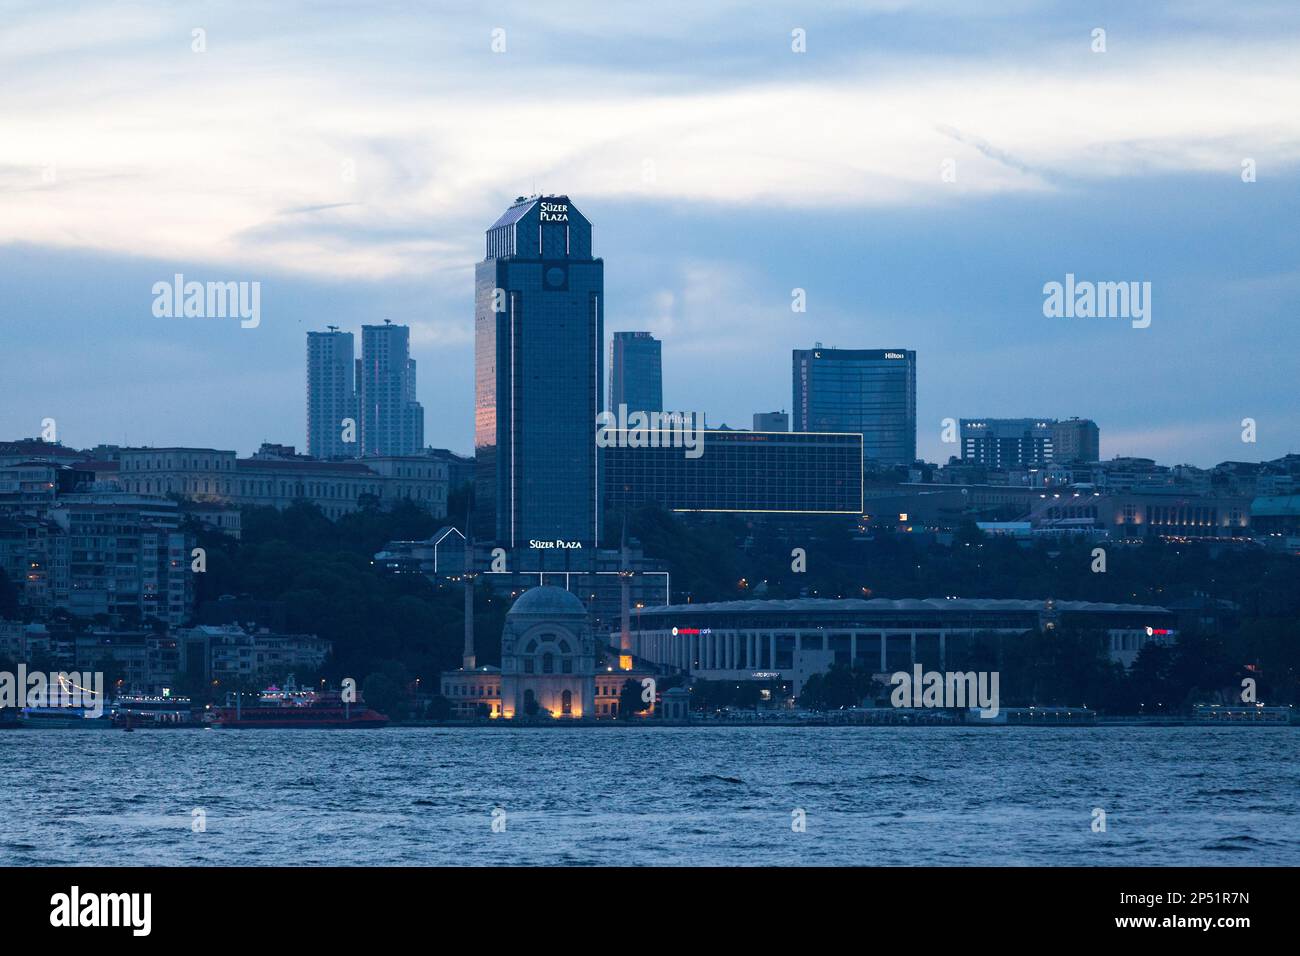 Istanbul, Turkey - May 12 2019: The Dolmabahçe Mosque is a mosque which was commissioned by queen mother Bezmi Alem Valide Sultan. Stock Photo